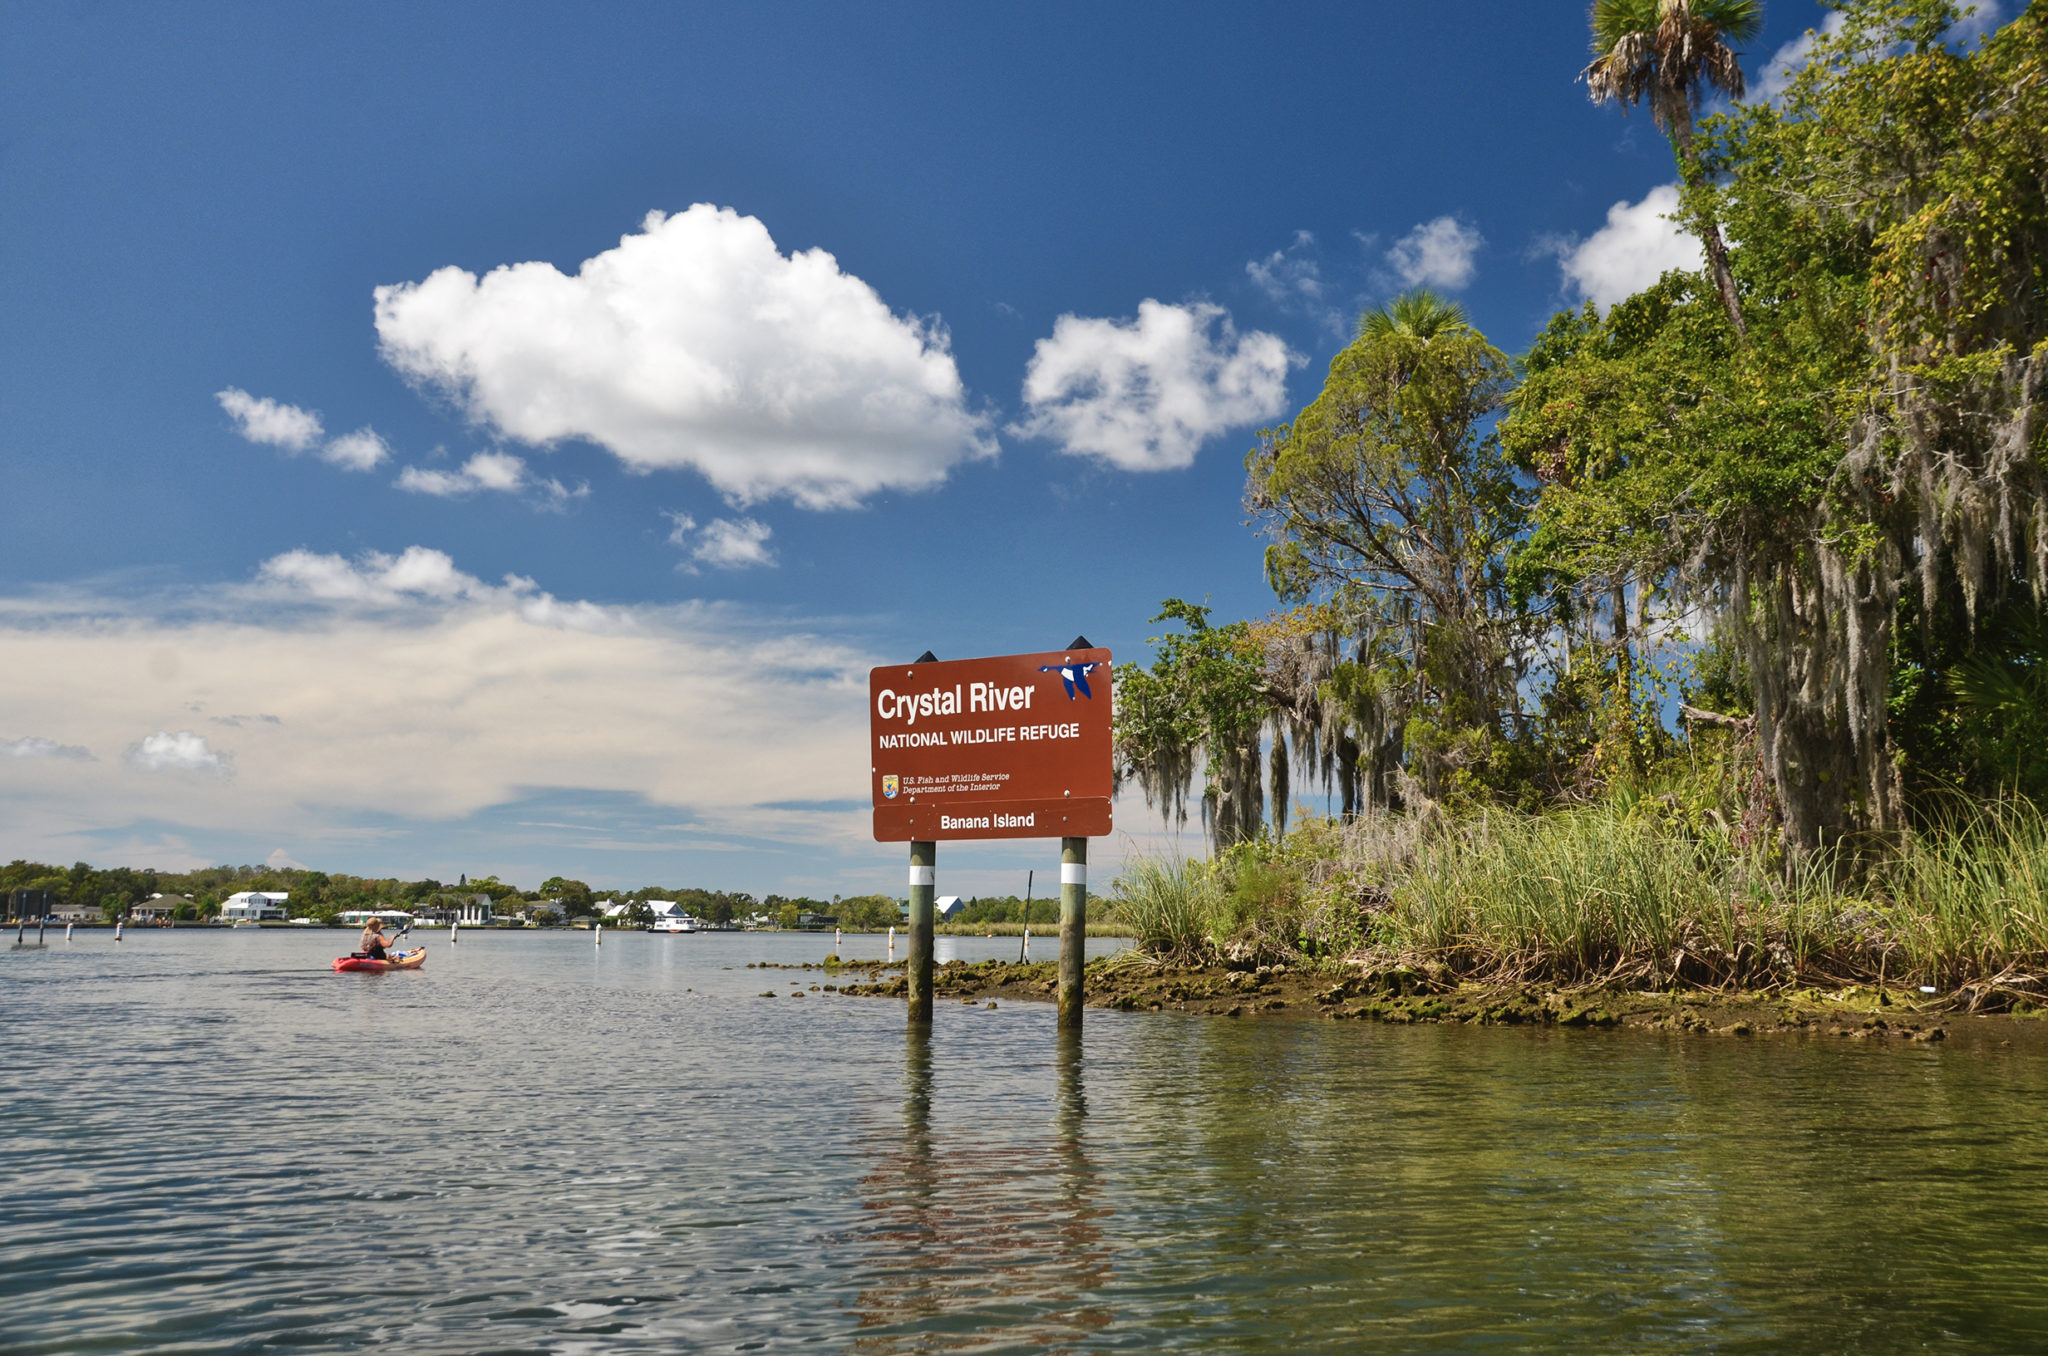 Recommended Experiences In and Around Crystal River